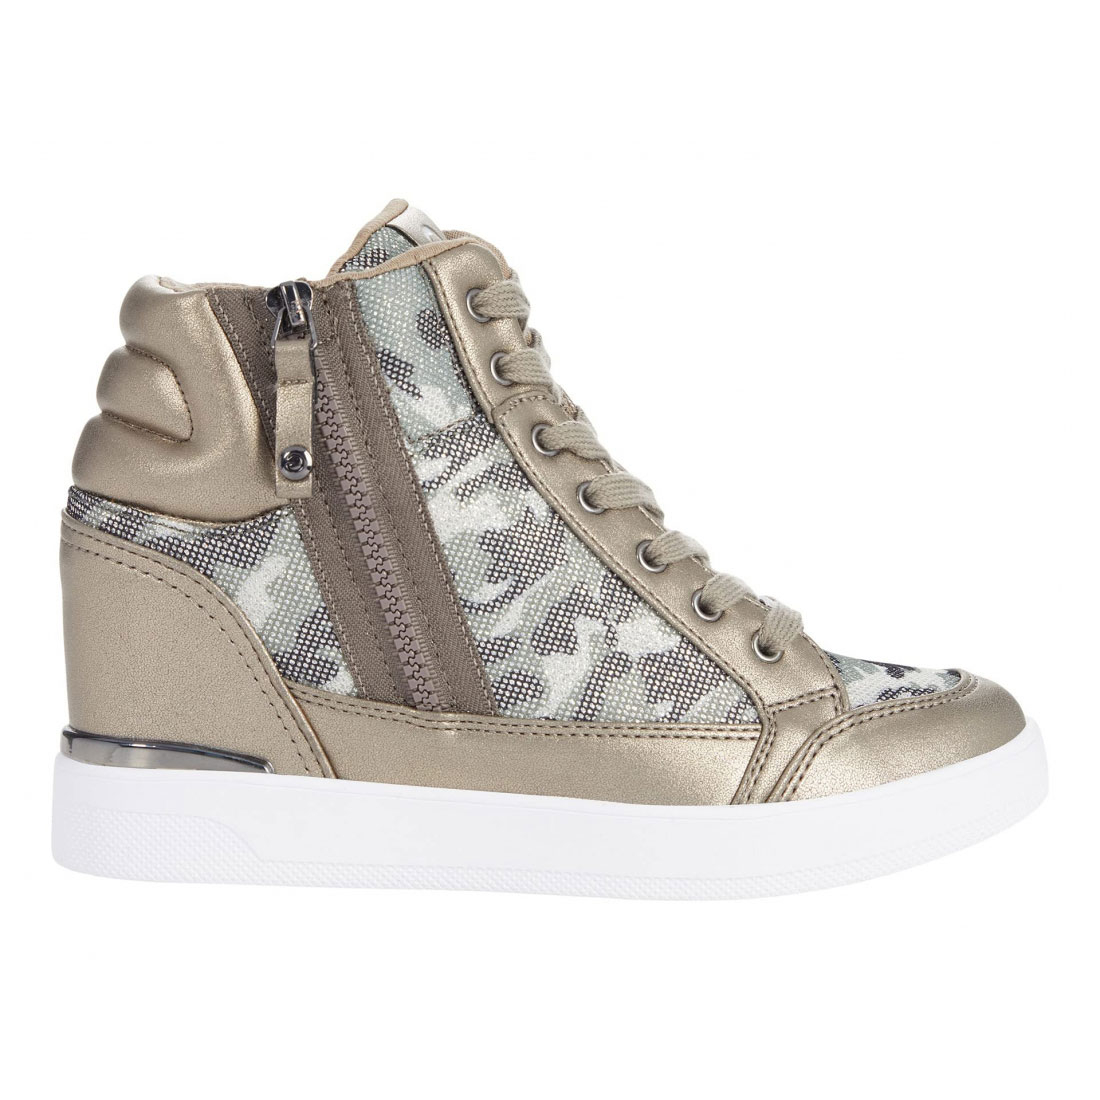 Women's 'GGNelly' Wedged Sneakers